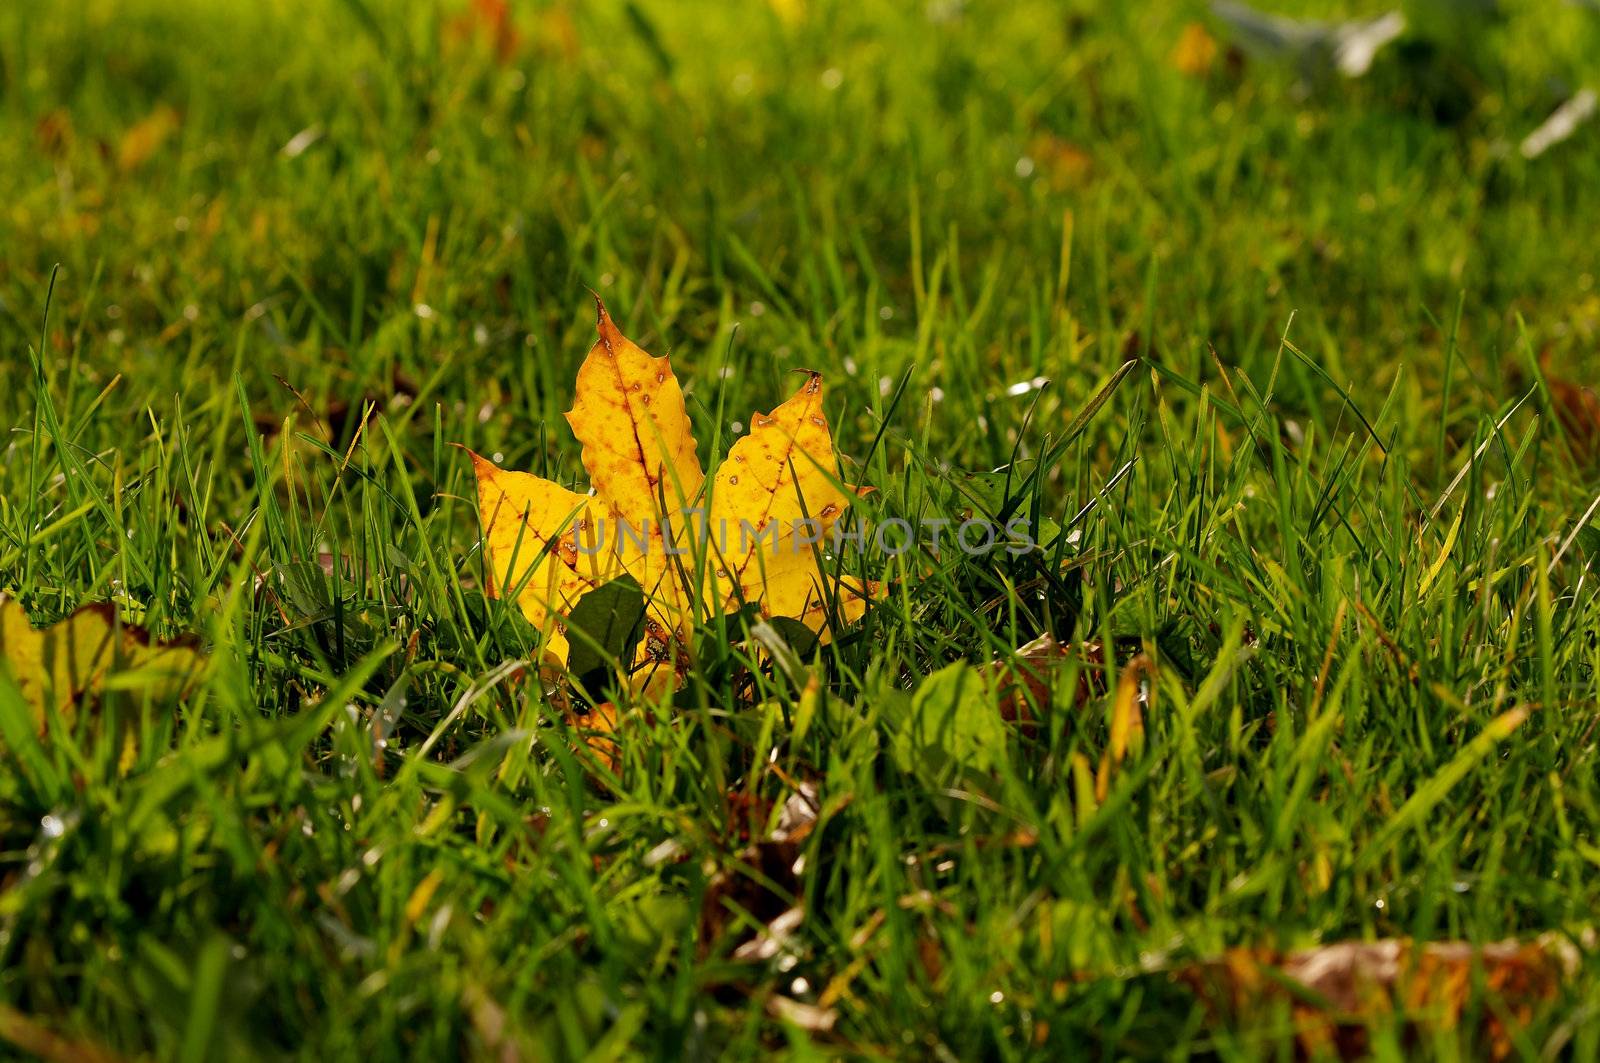 Maple Leaf in Green Grass Outdoors selective focus